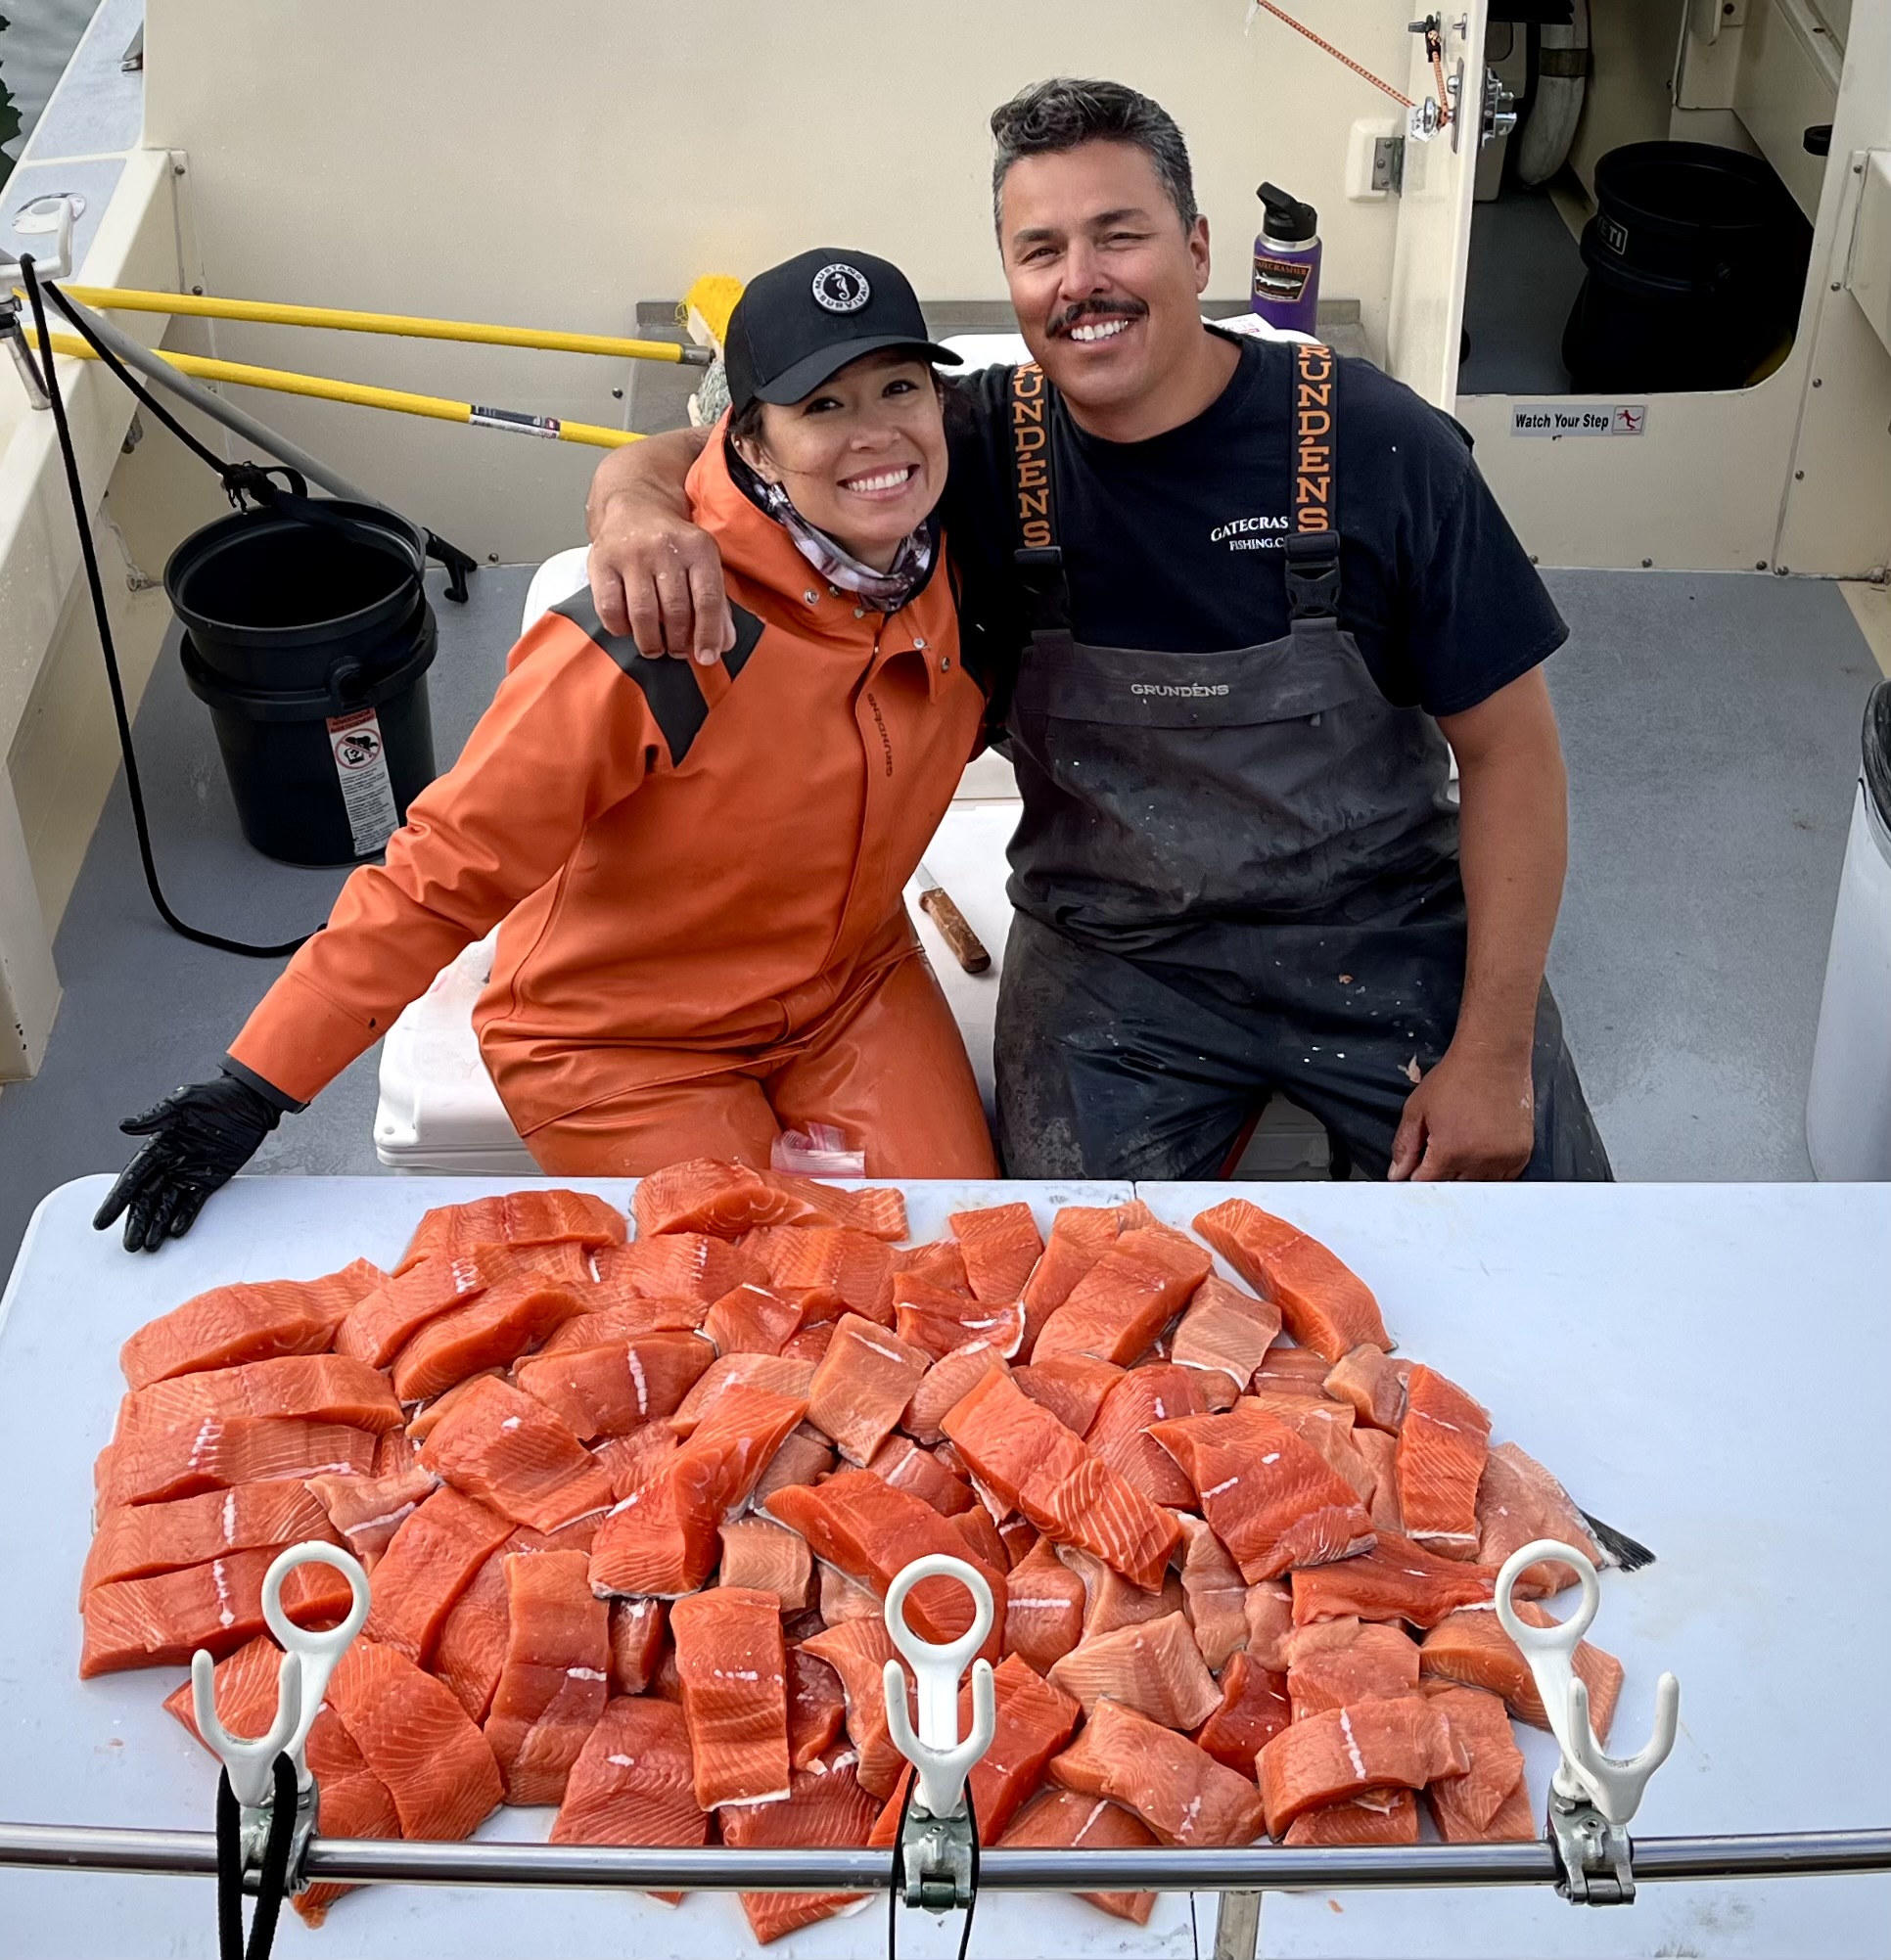 Two boat captains pose for a photo on a boat beside salmon filets.